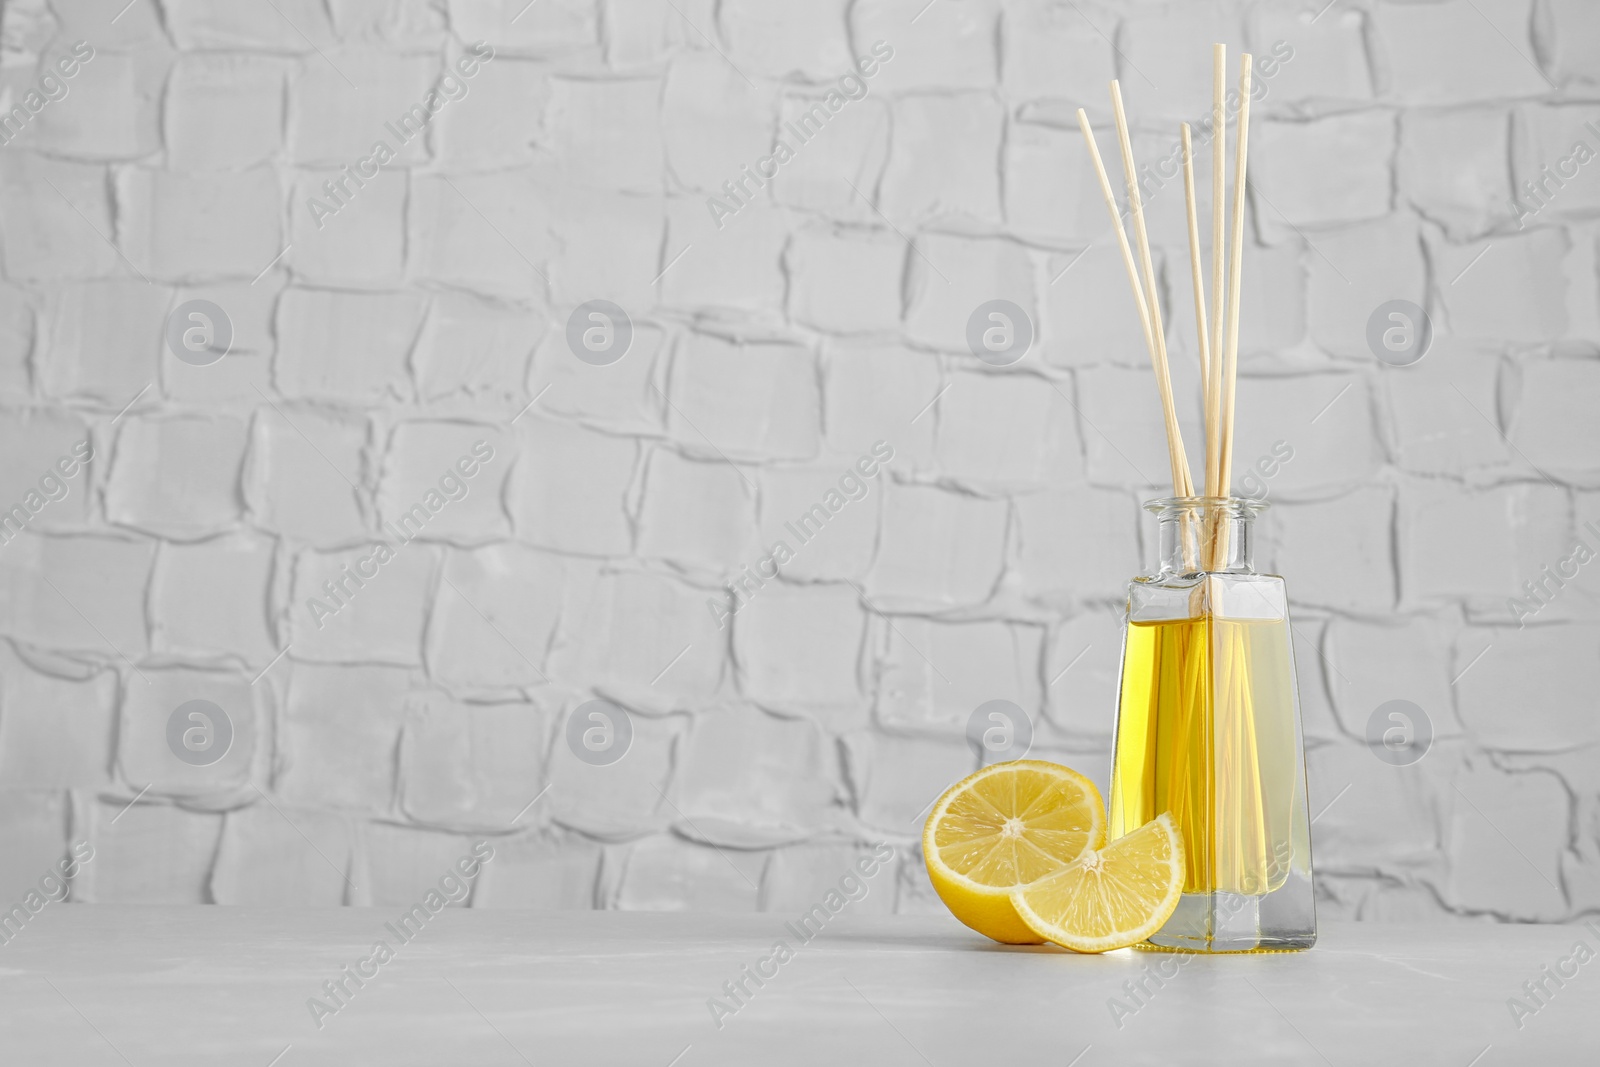 Photo of Aromatic reed freshener and lemon on table against textured wall. Space for text